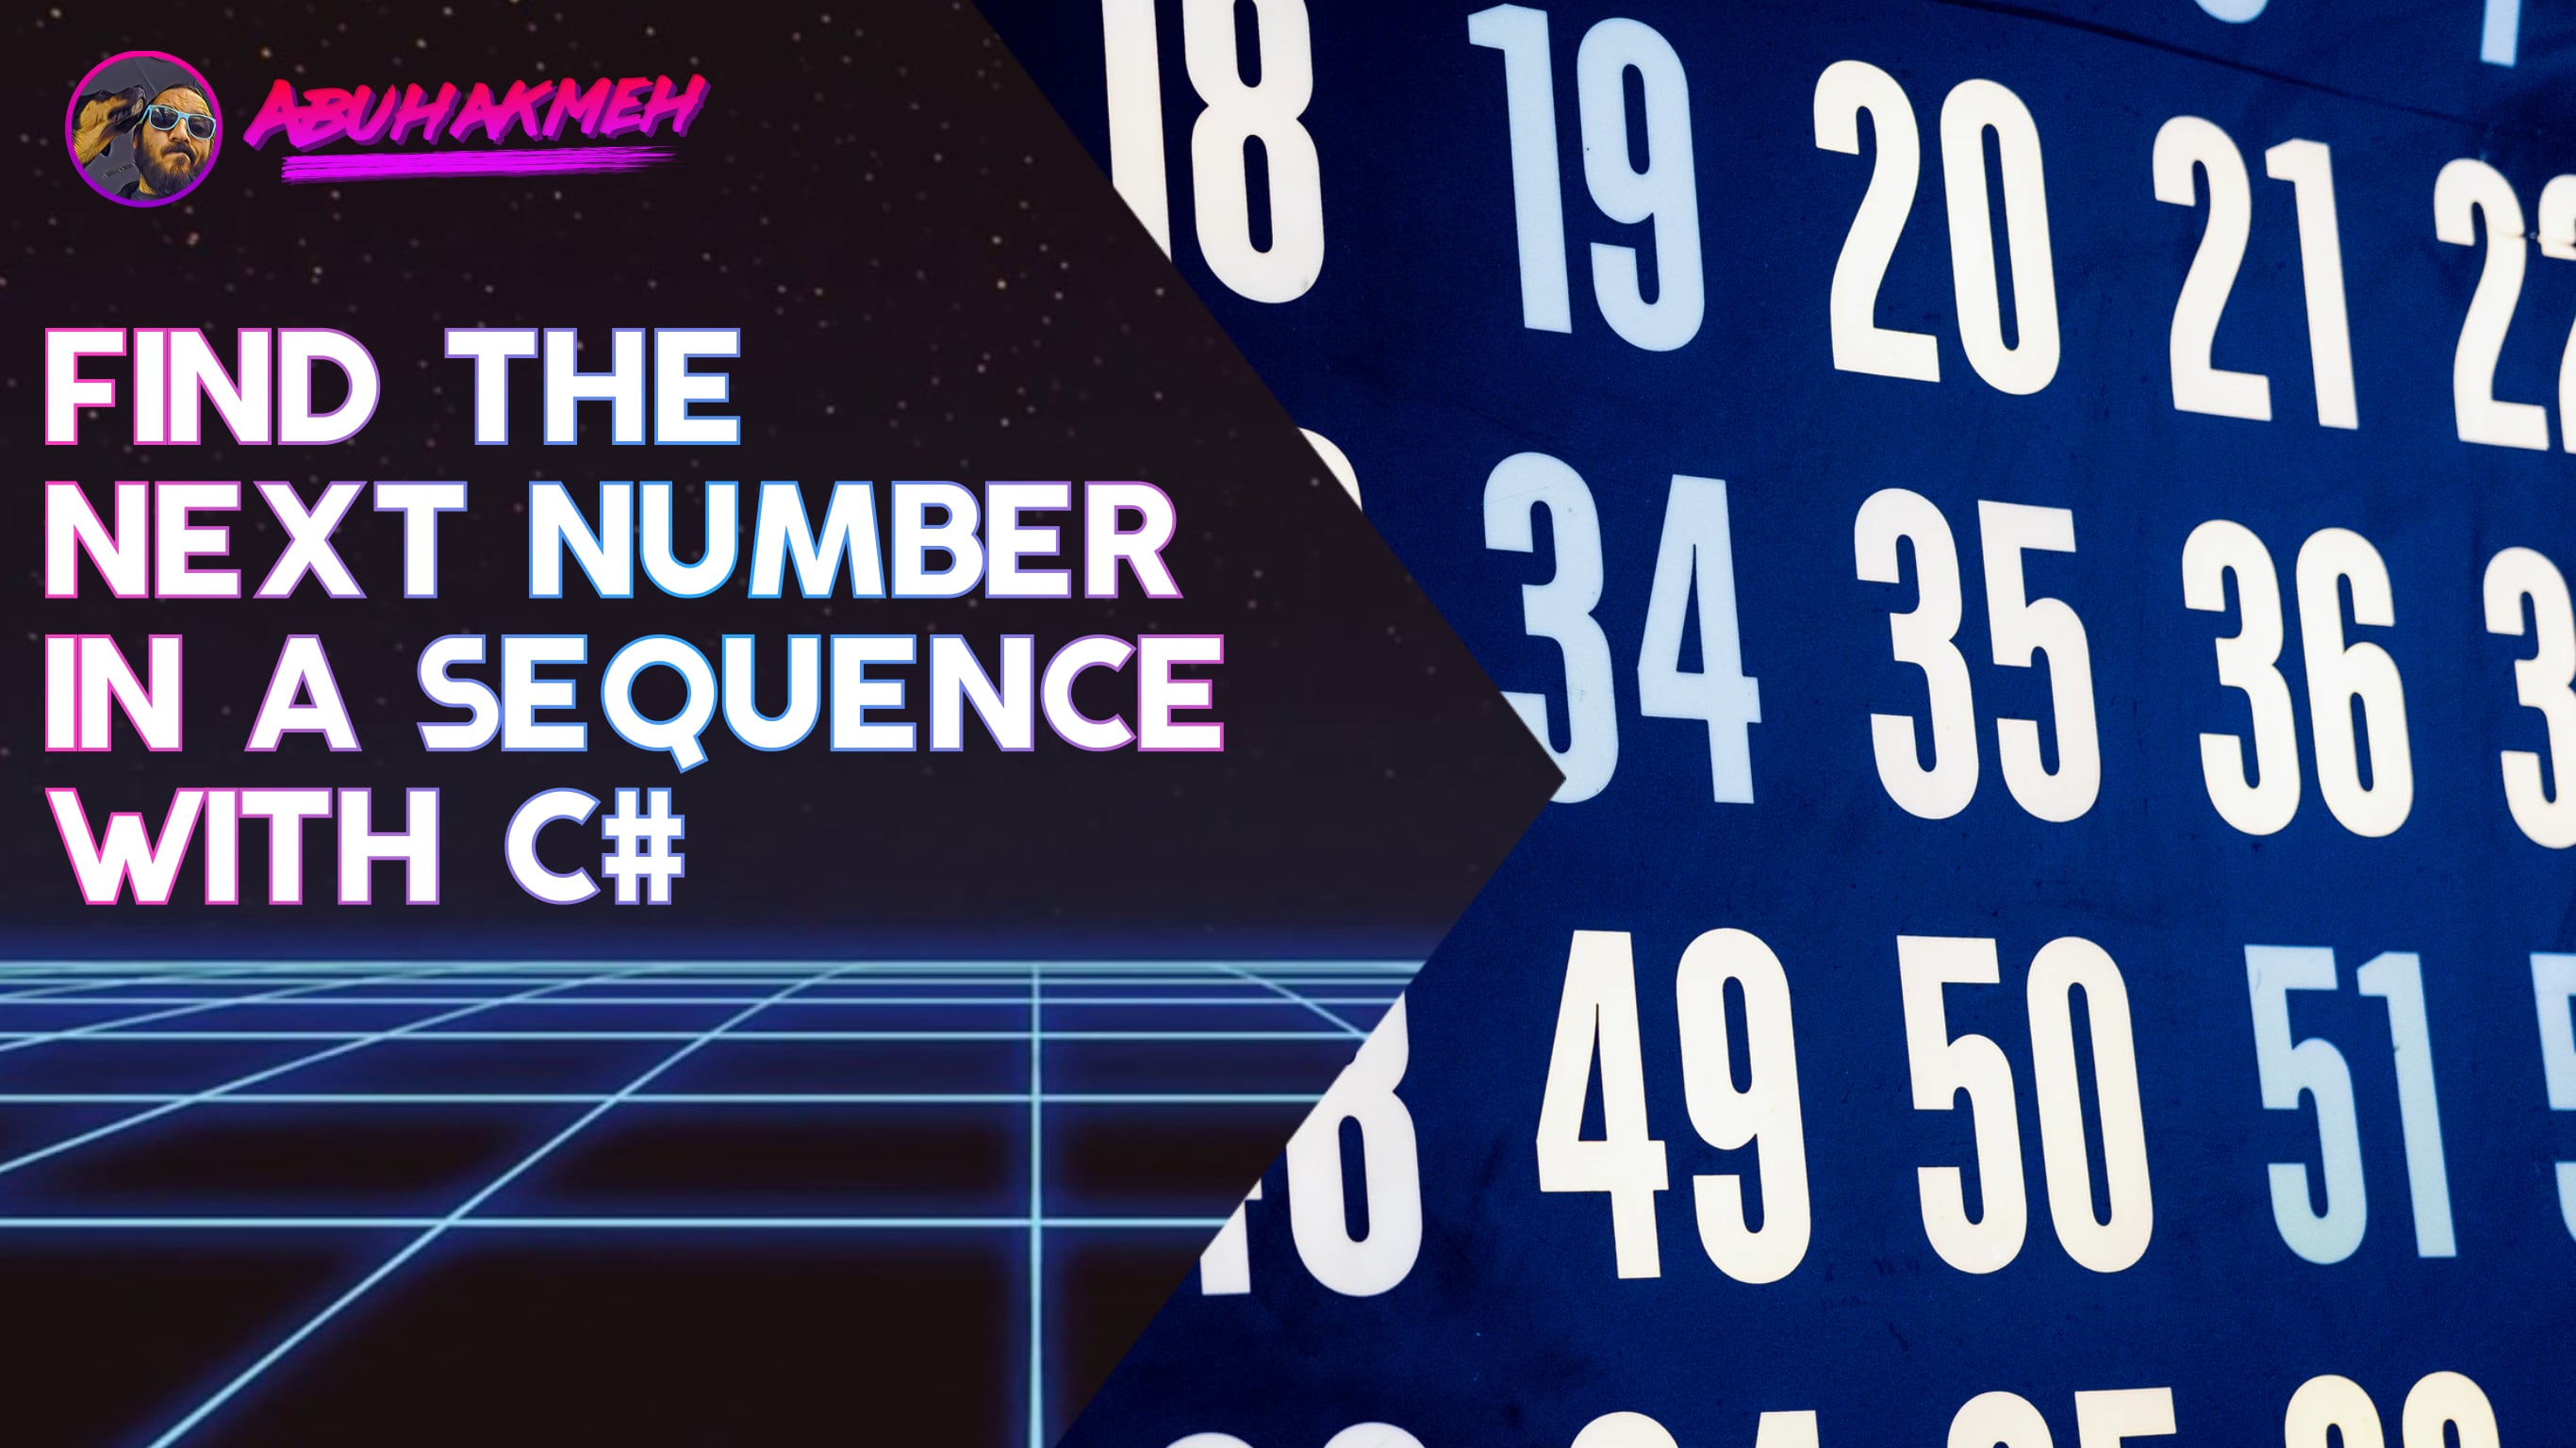 find-the-next-number-in-a-sequence-with-c-khalid-abuhakmeh